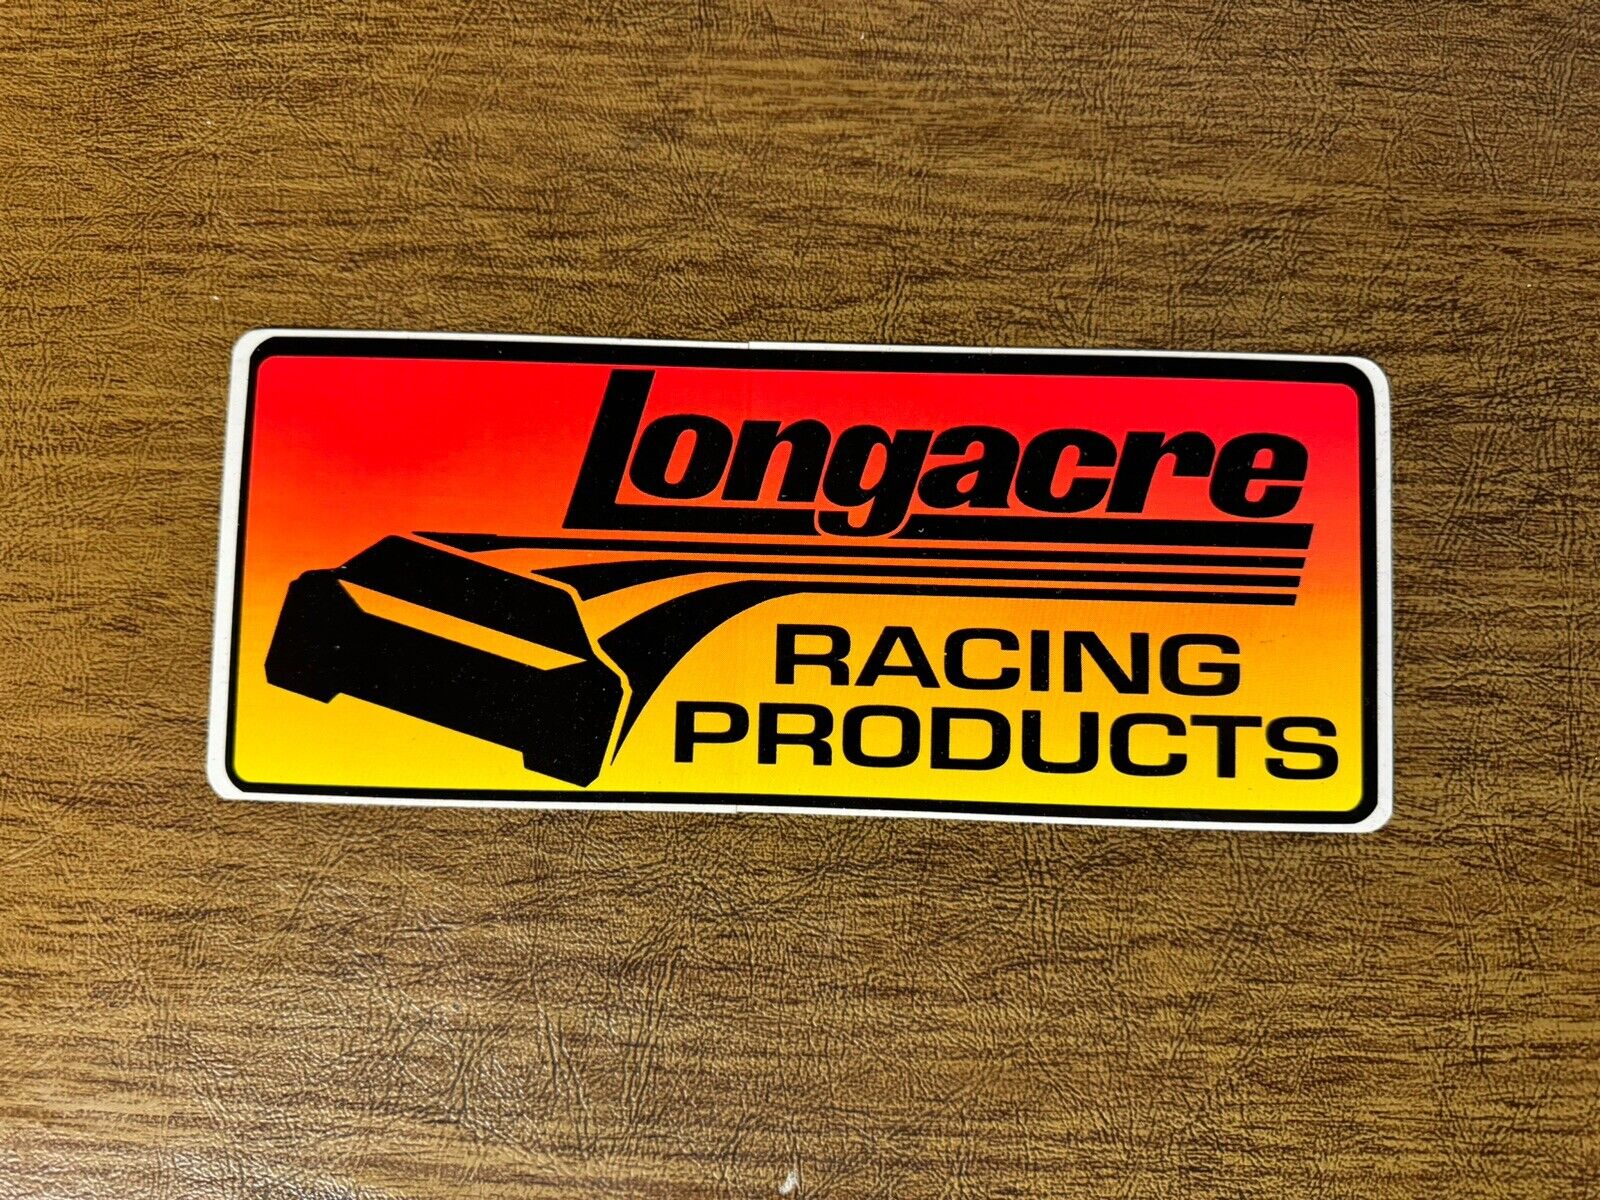 Large 8 1/2” x 3 1/2” Longacre Racing Products Sticker in Mint Condition.